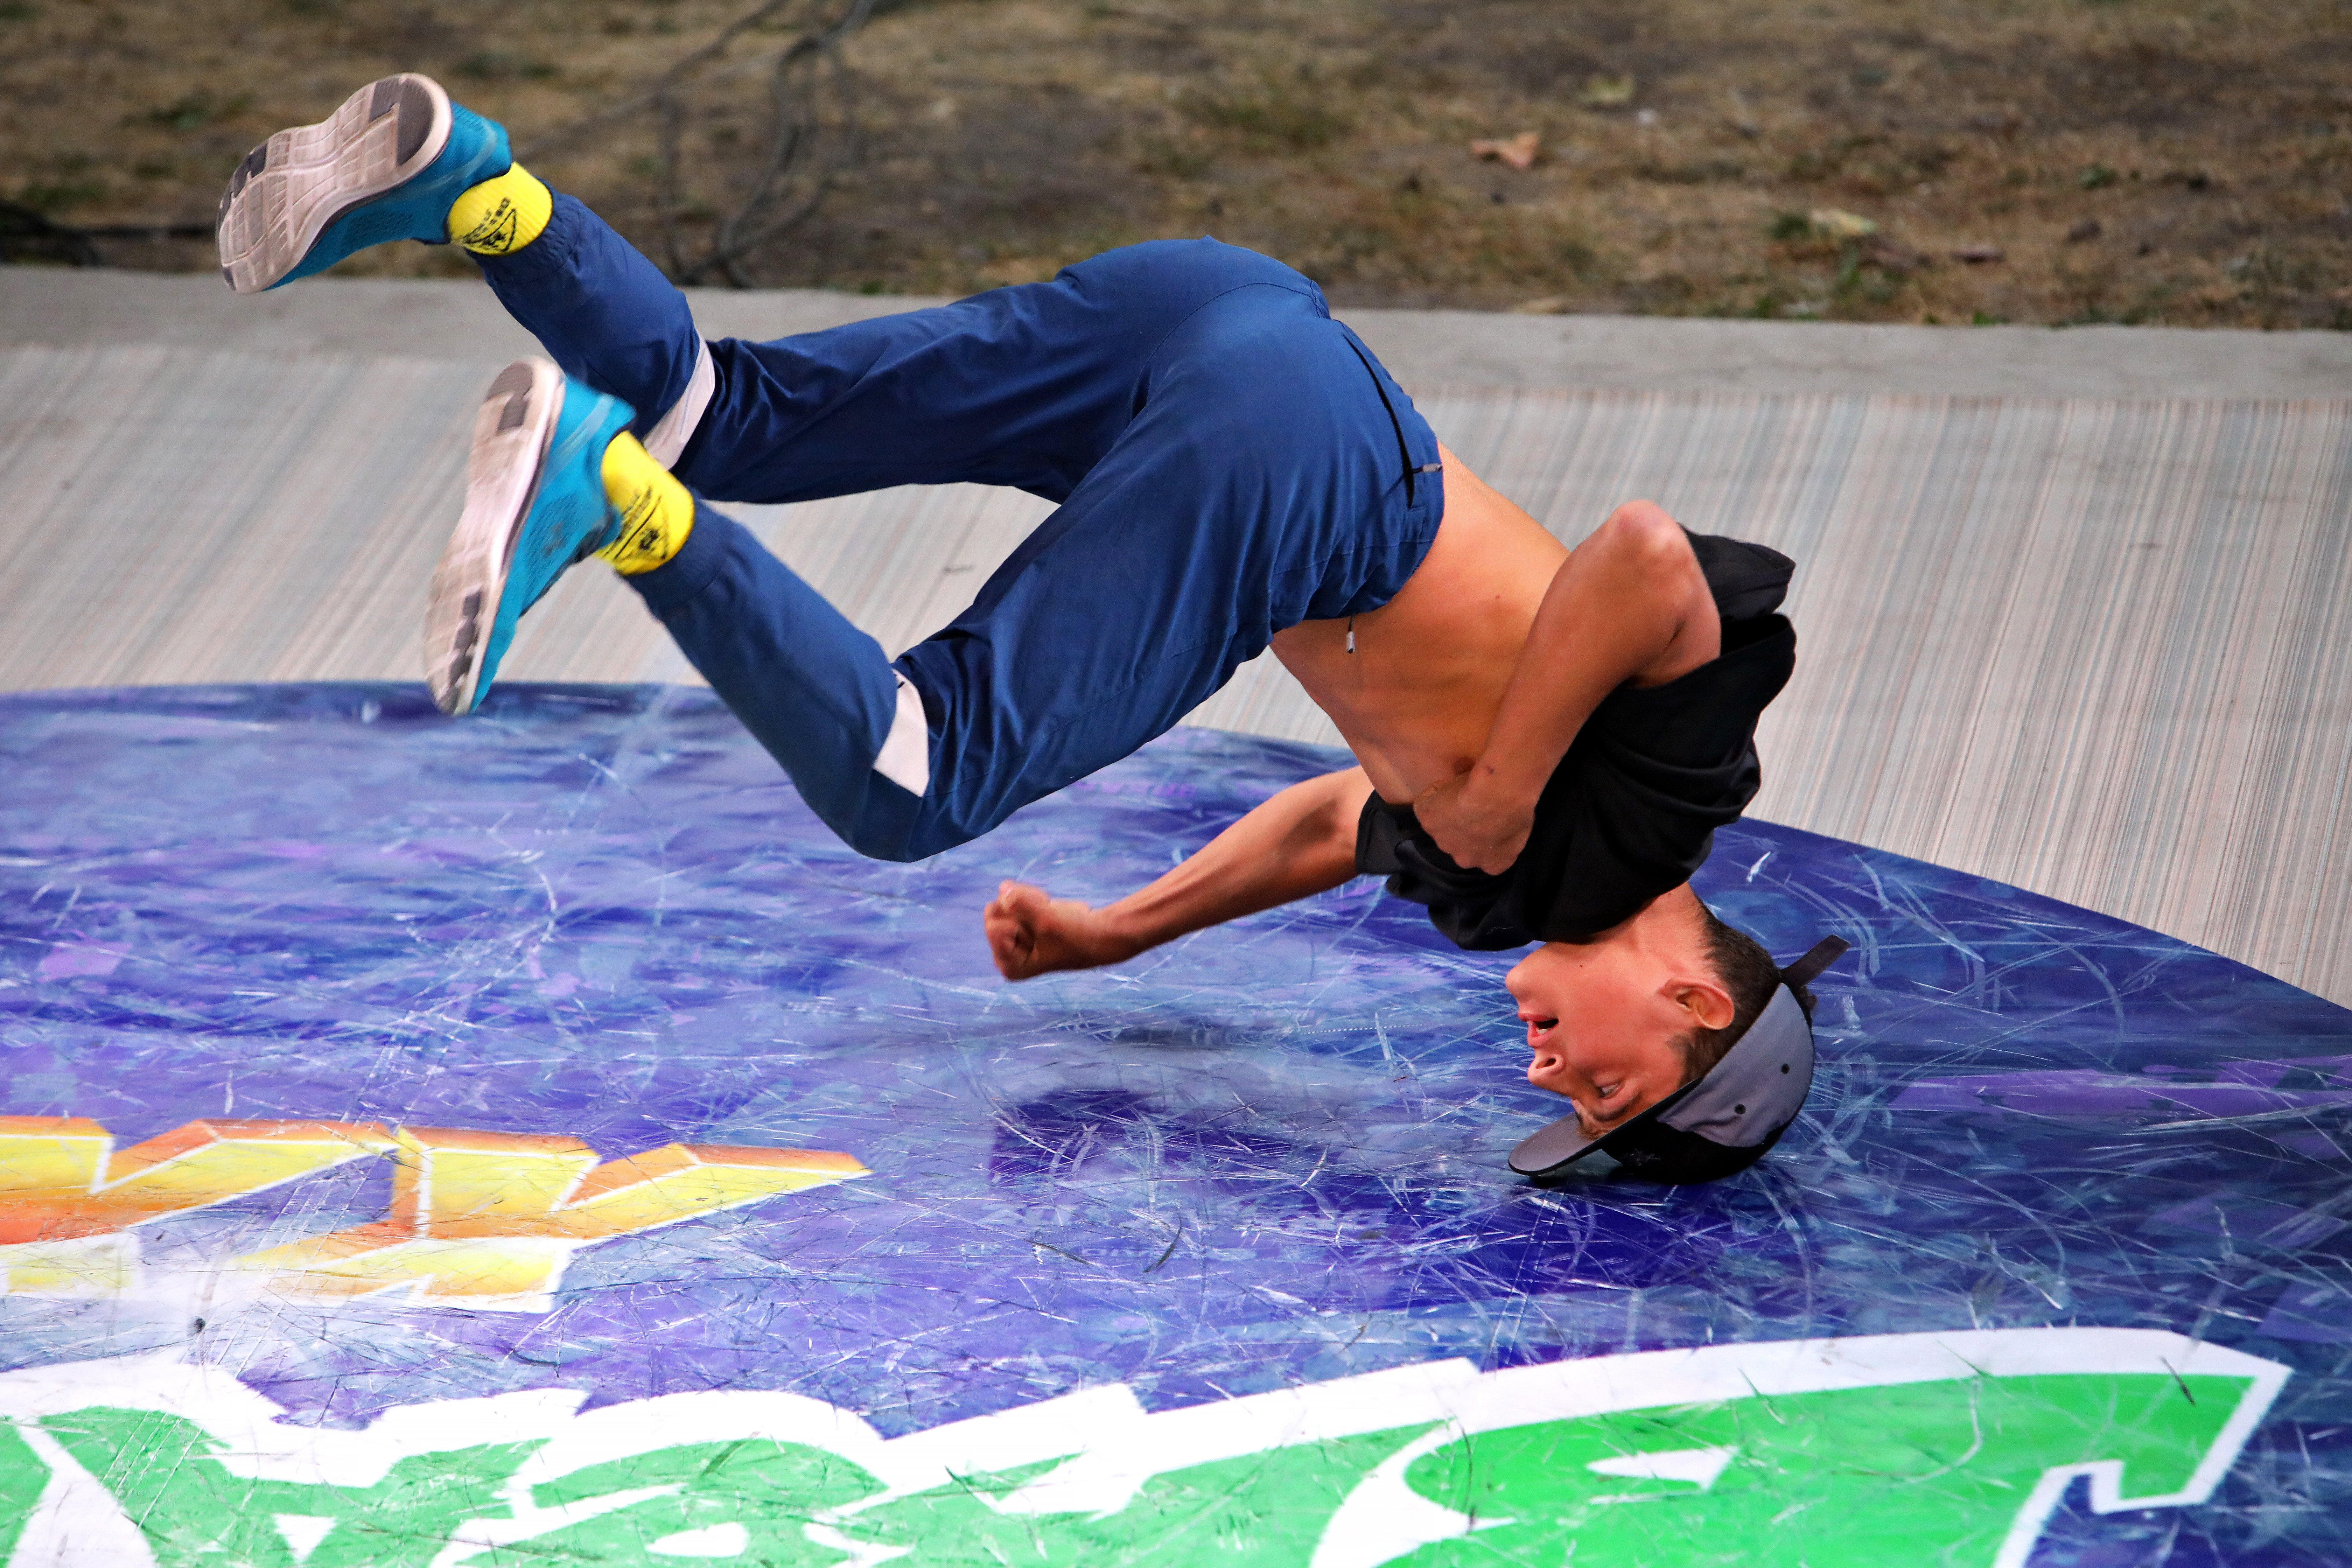 Breakdancing Is Officially an Olympic Sport for Paris 2024